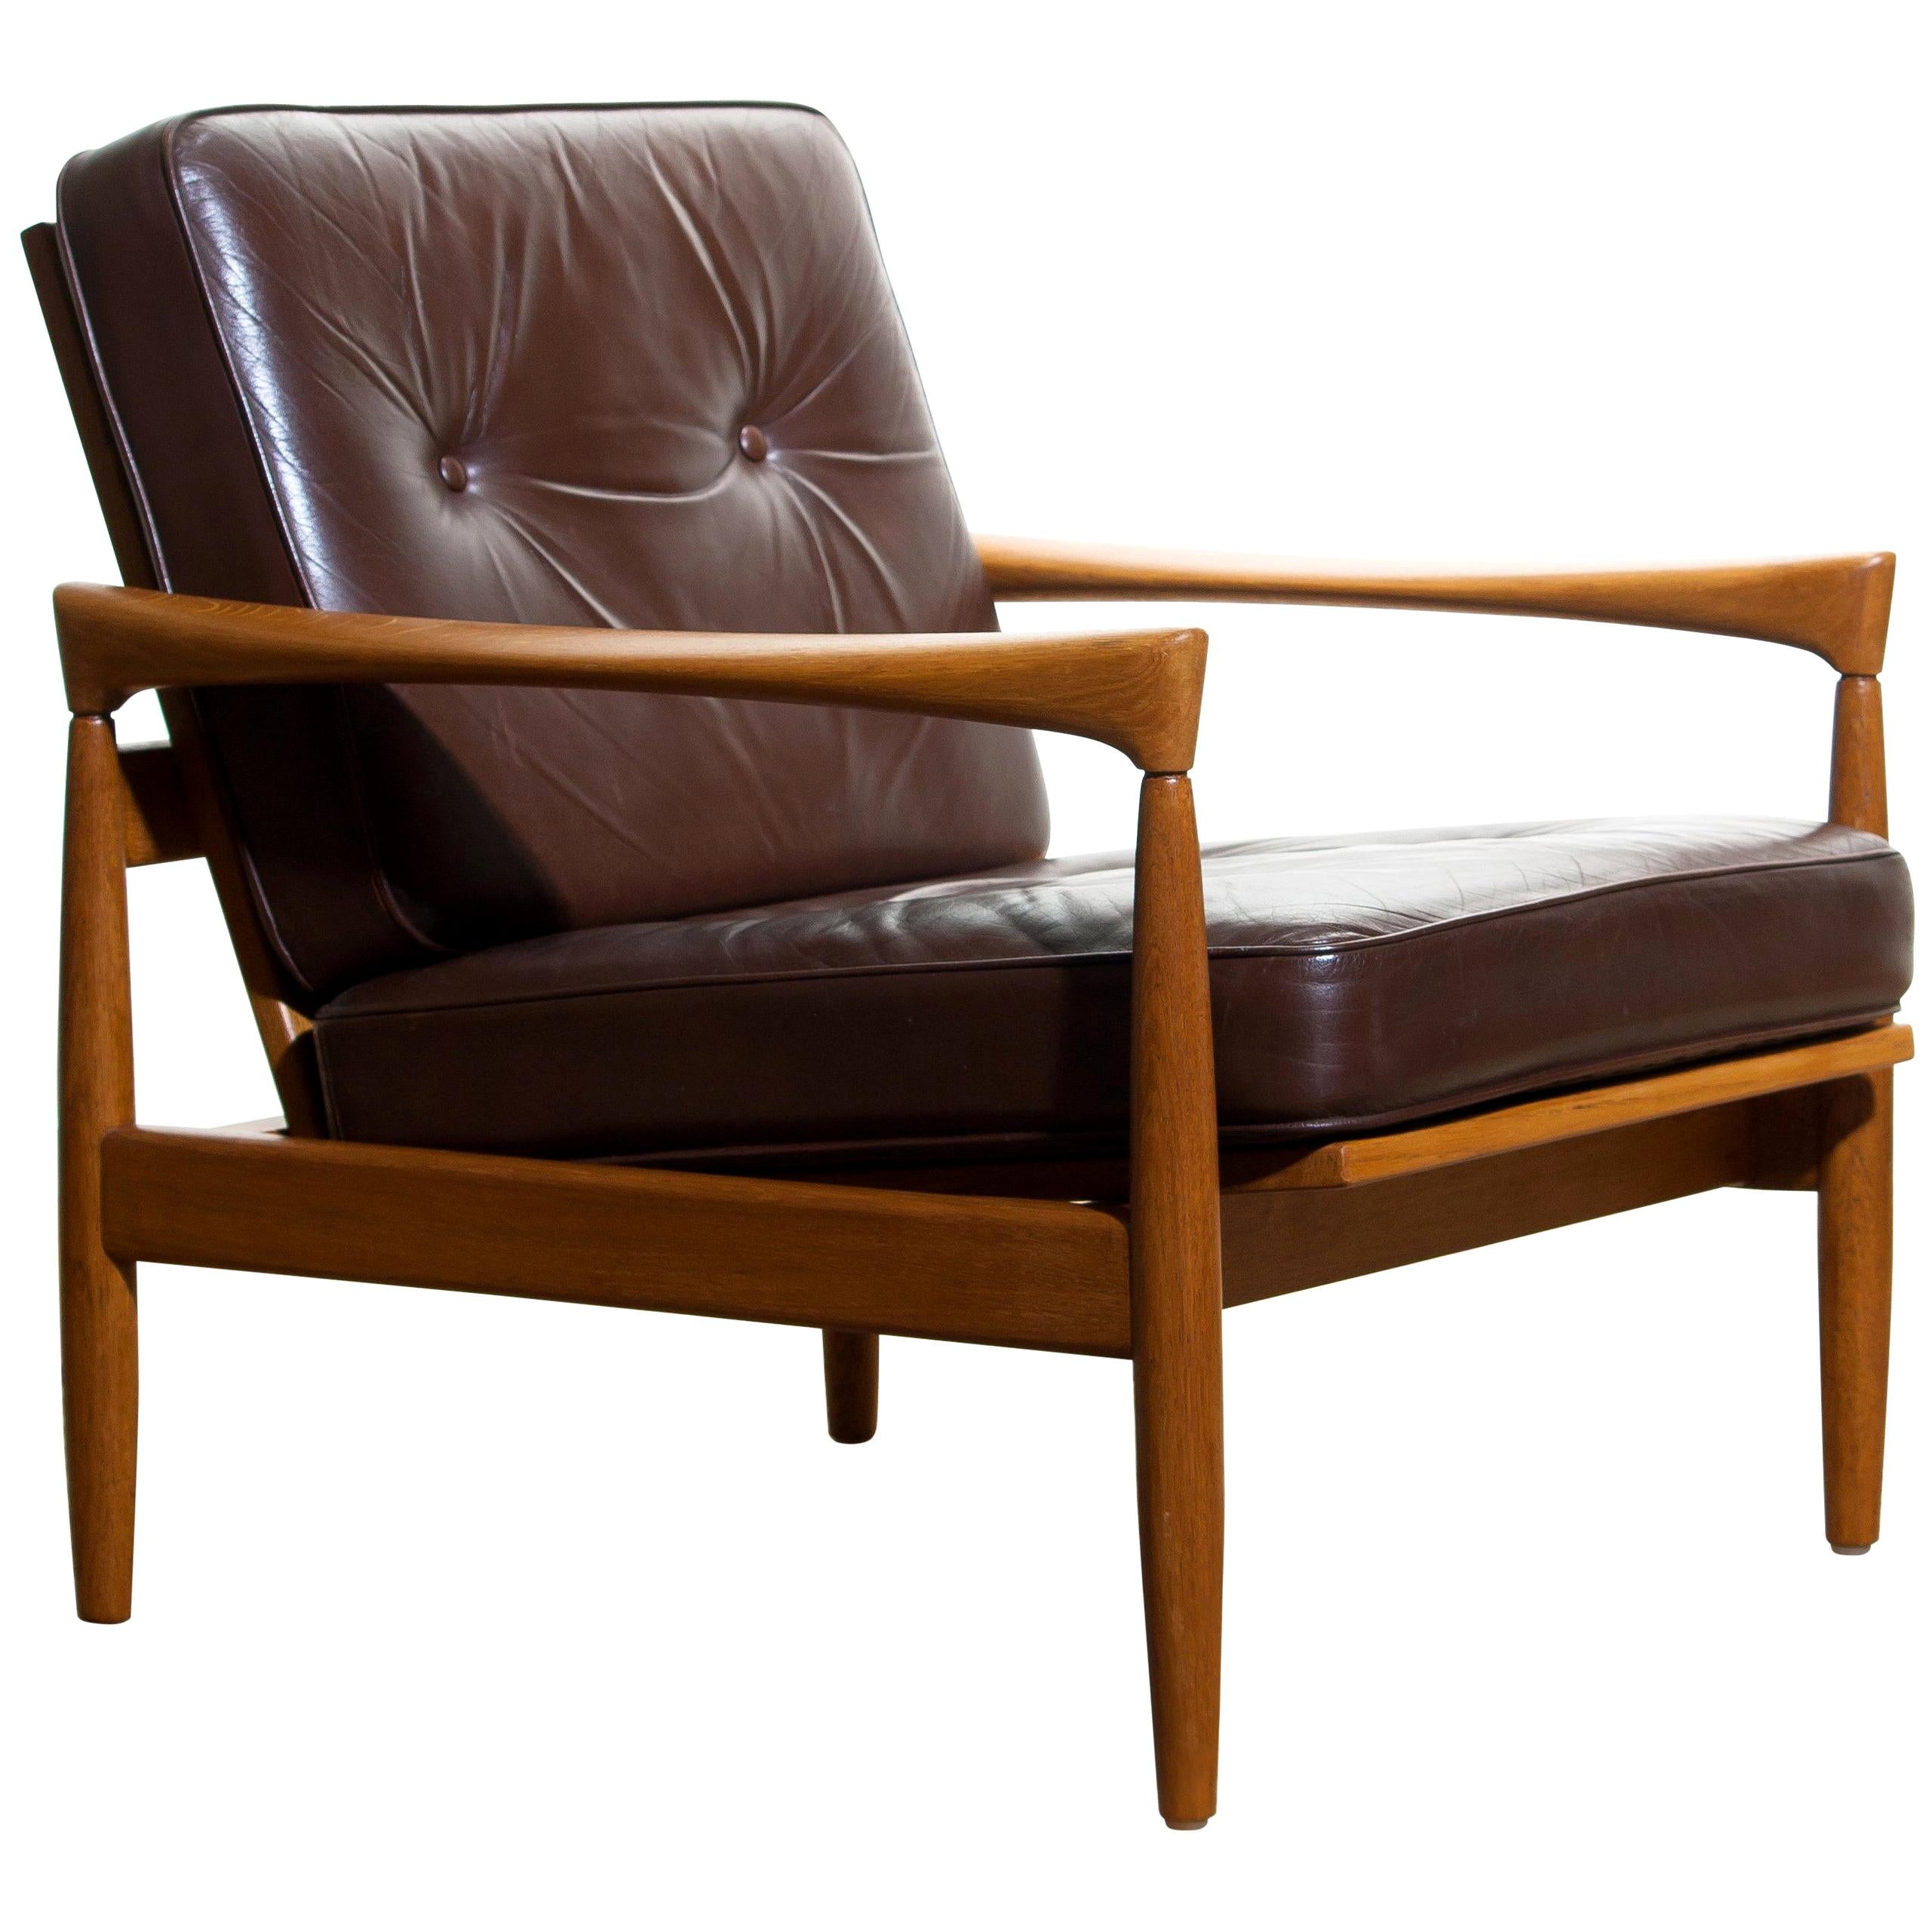 1960s, Oak and Brown Leather Lounge Chair by Erik Wörtz for Broderna Anderssons